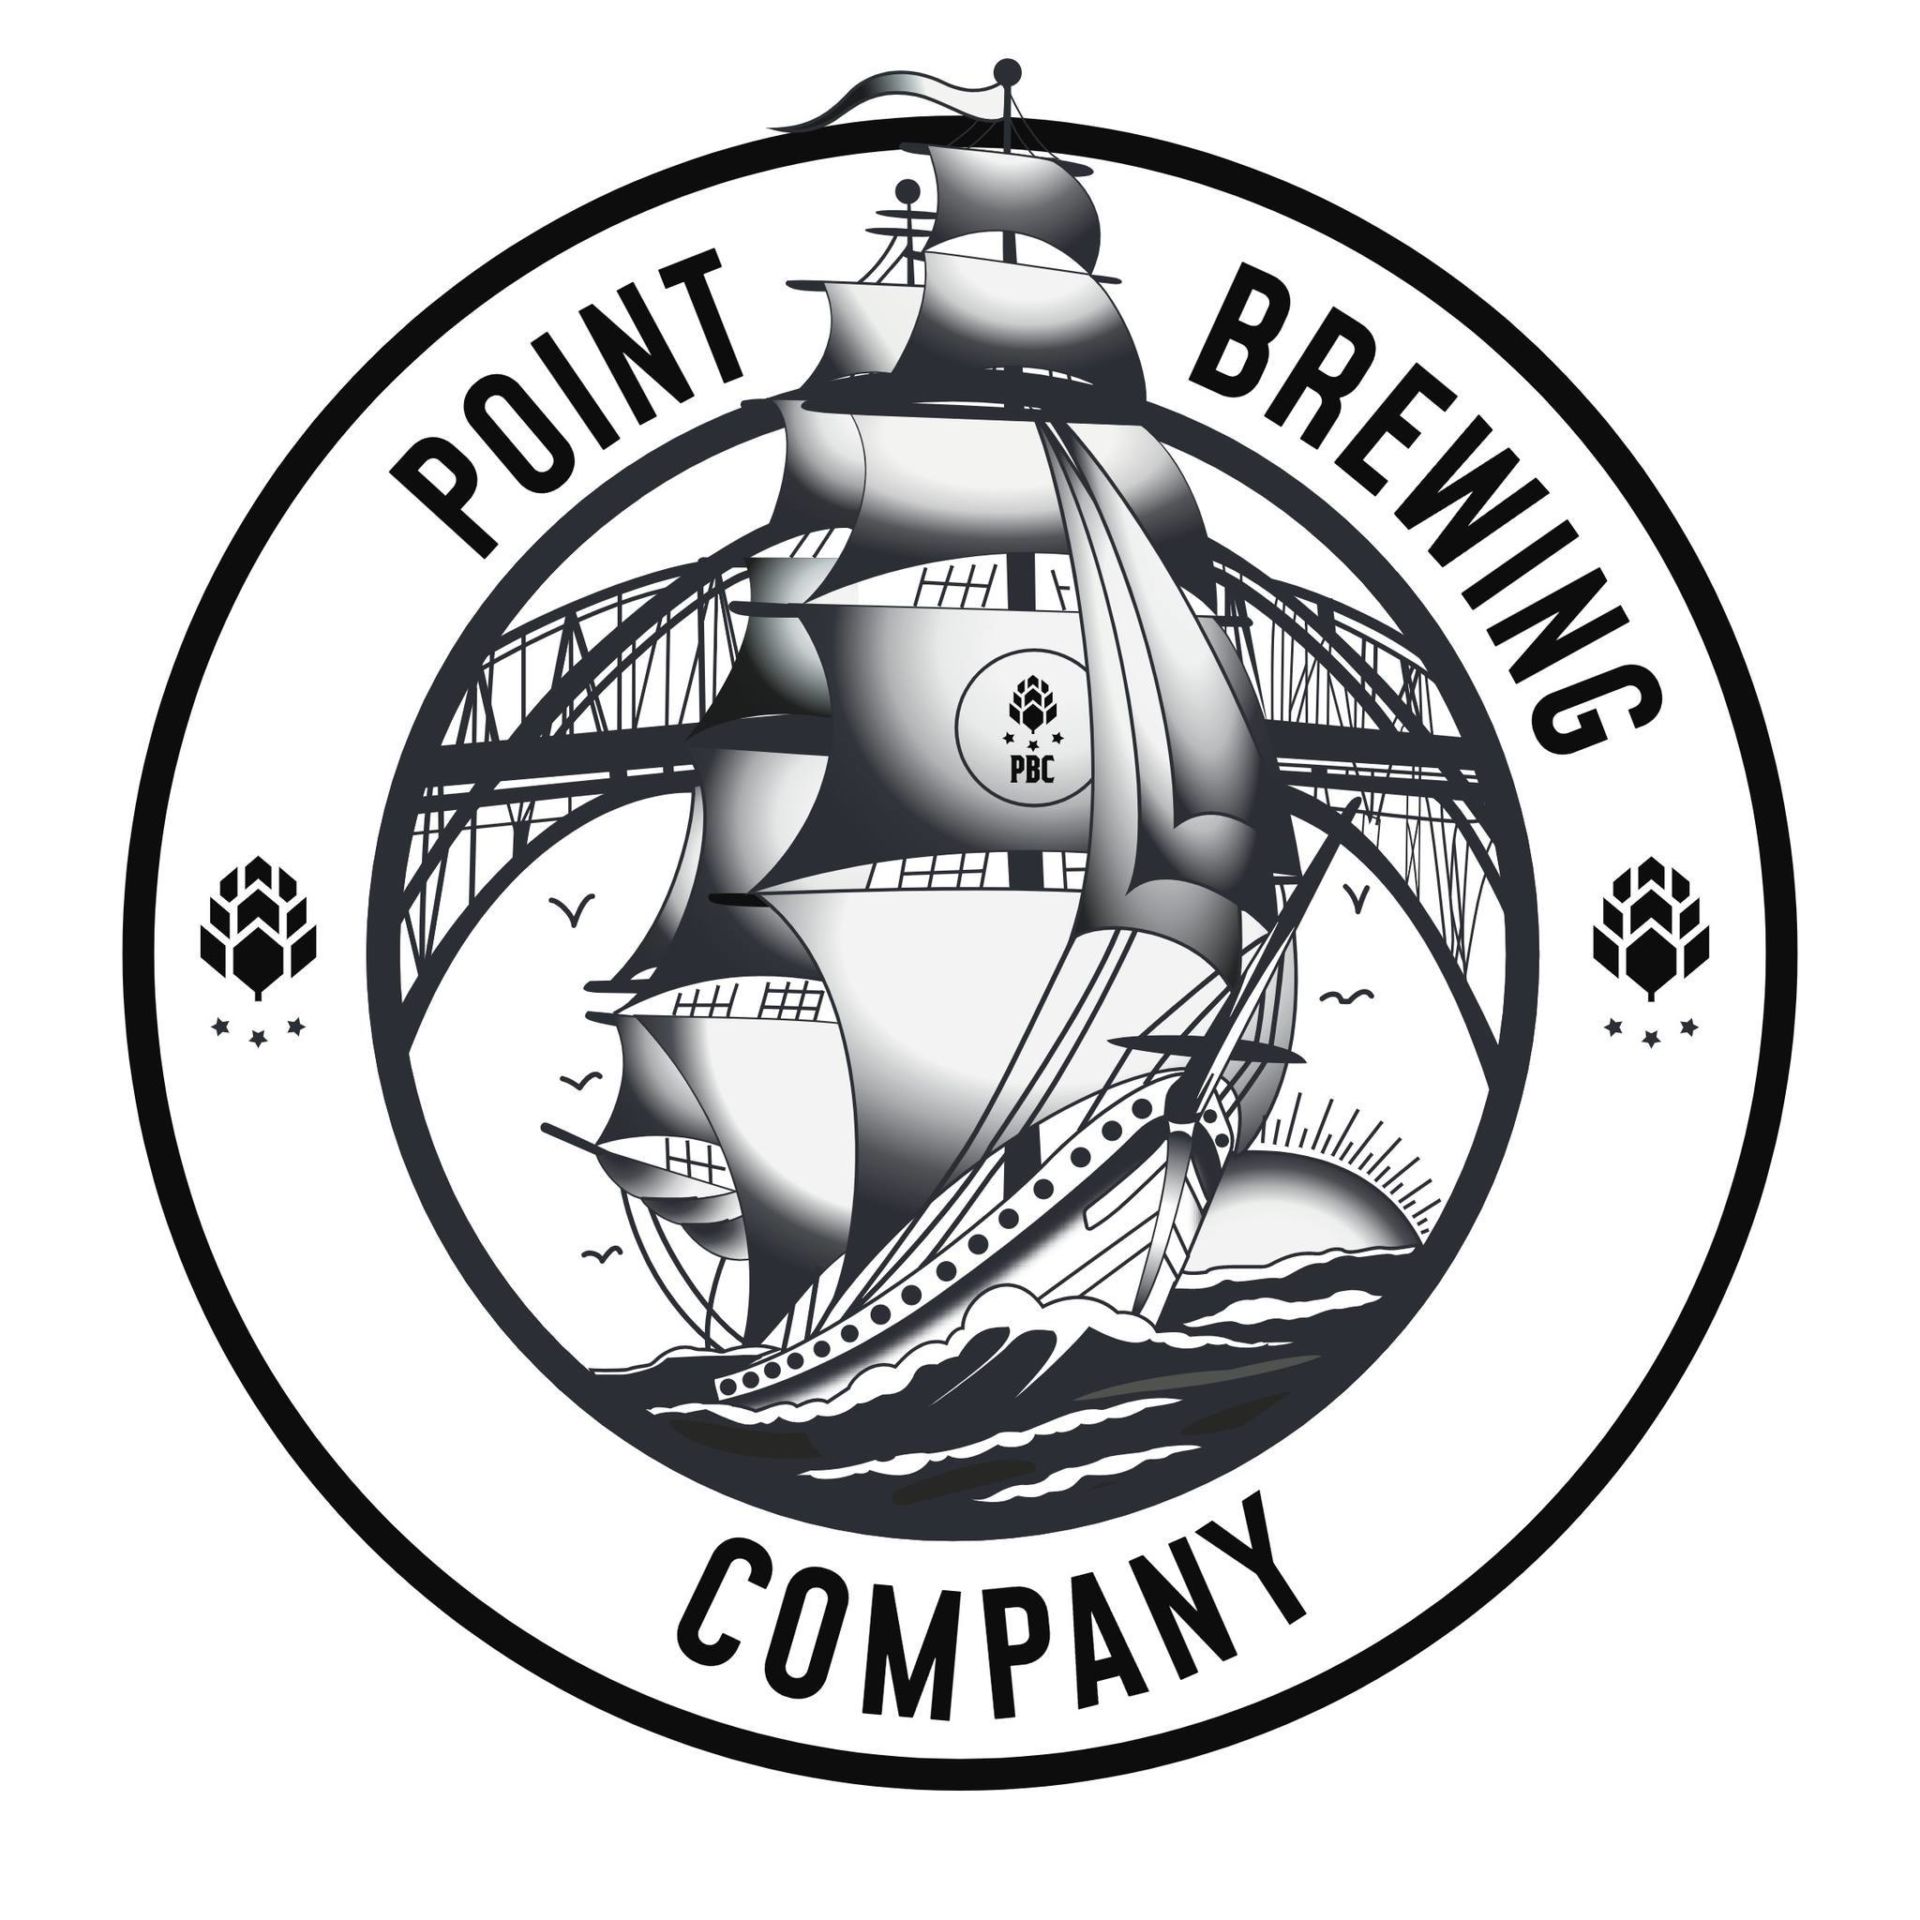 Point Brewing Co. logo with boat